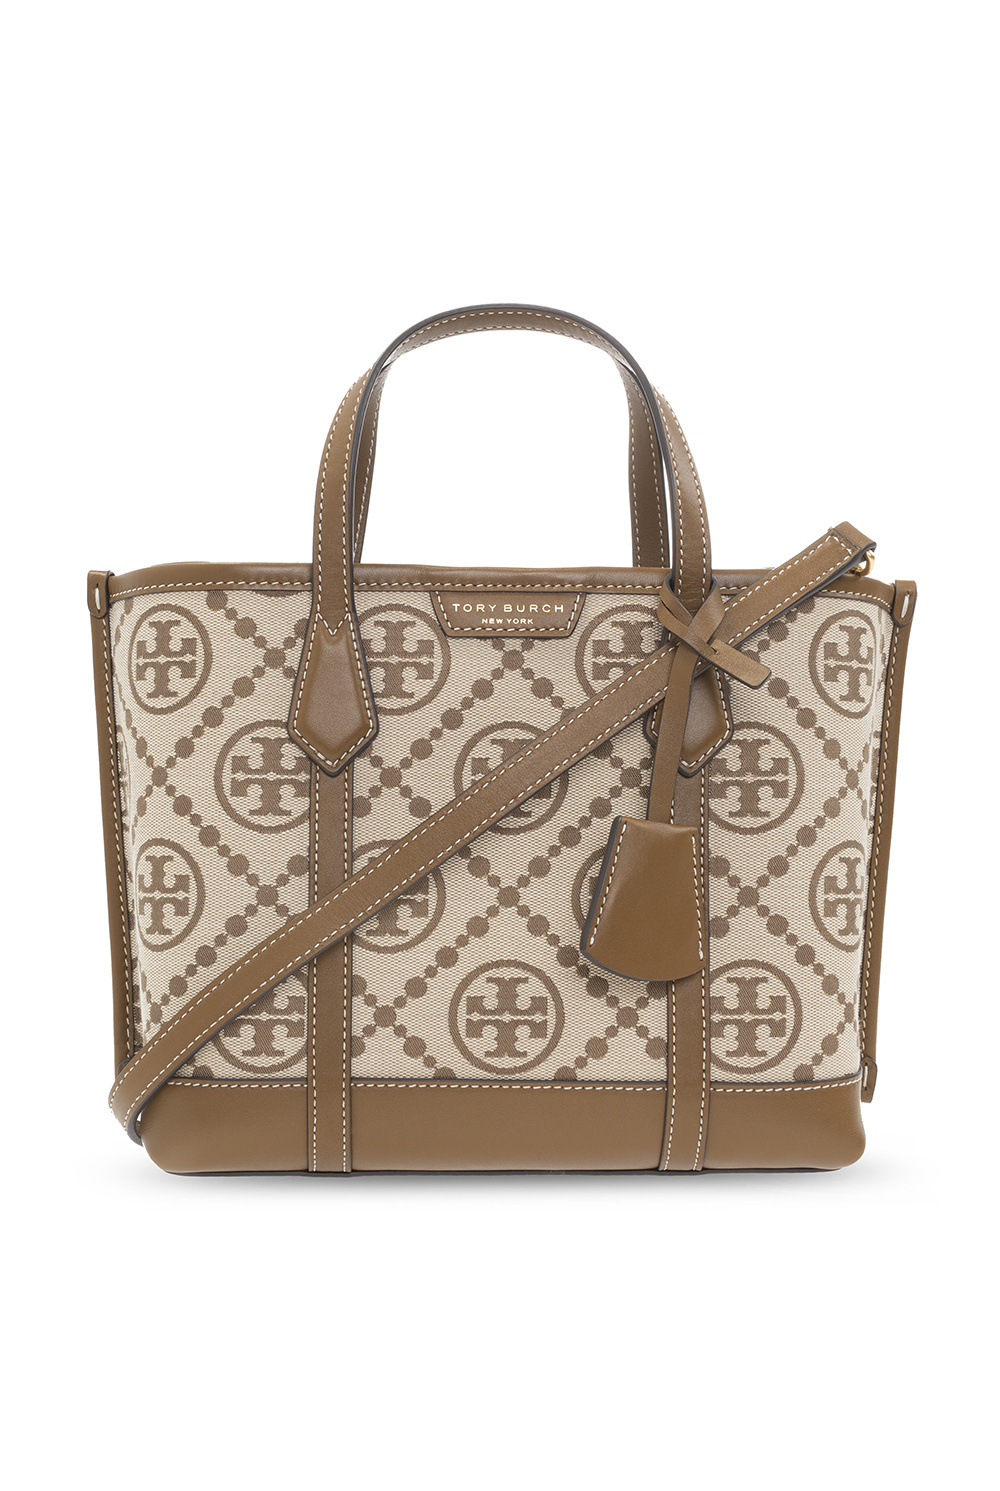 Women's Small Perry Shopping Bag by Tory Burch